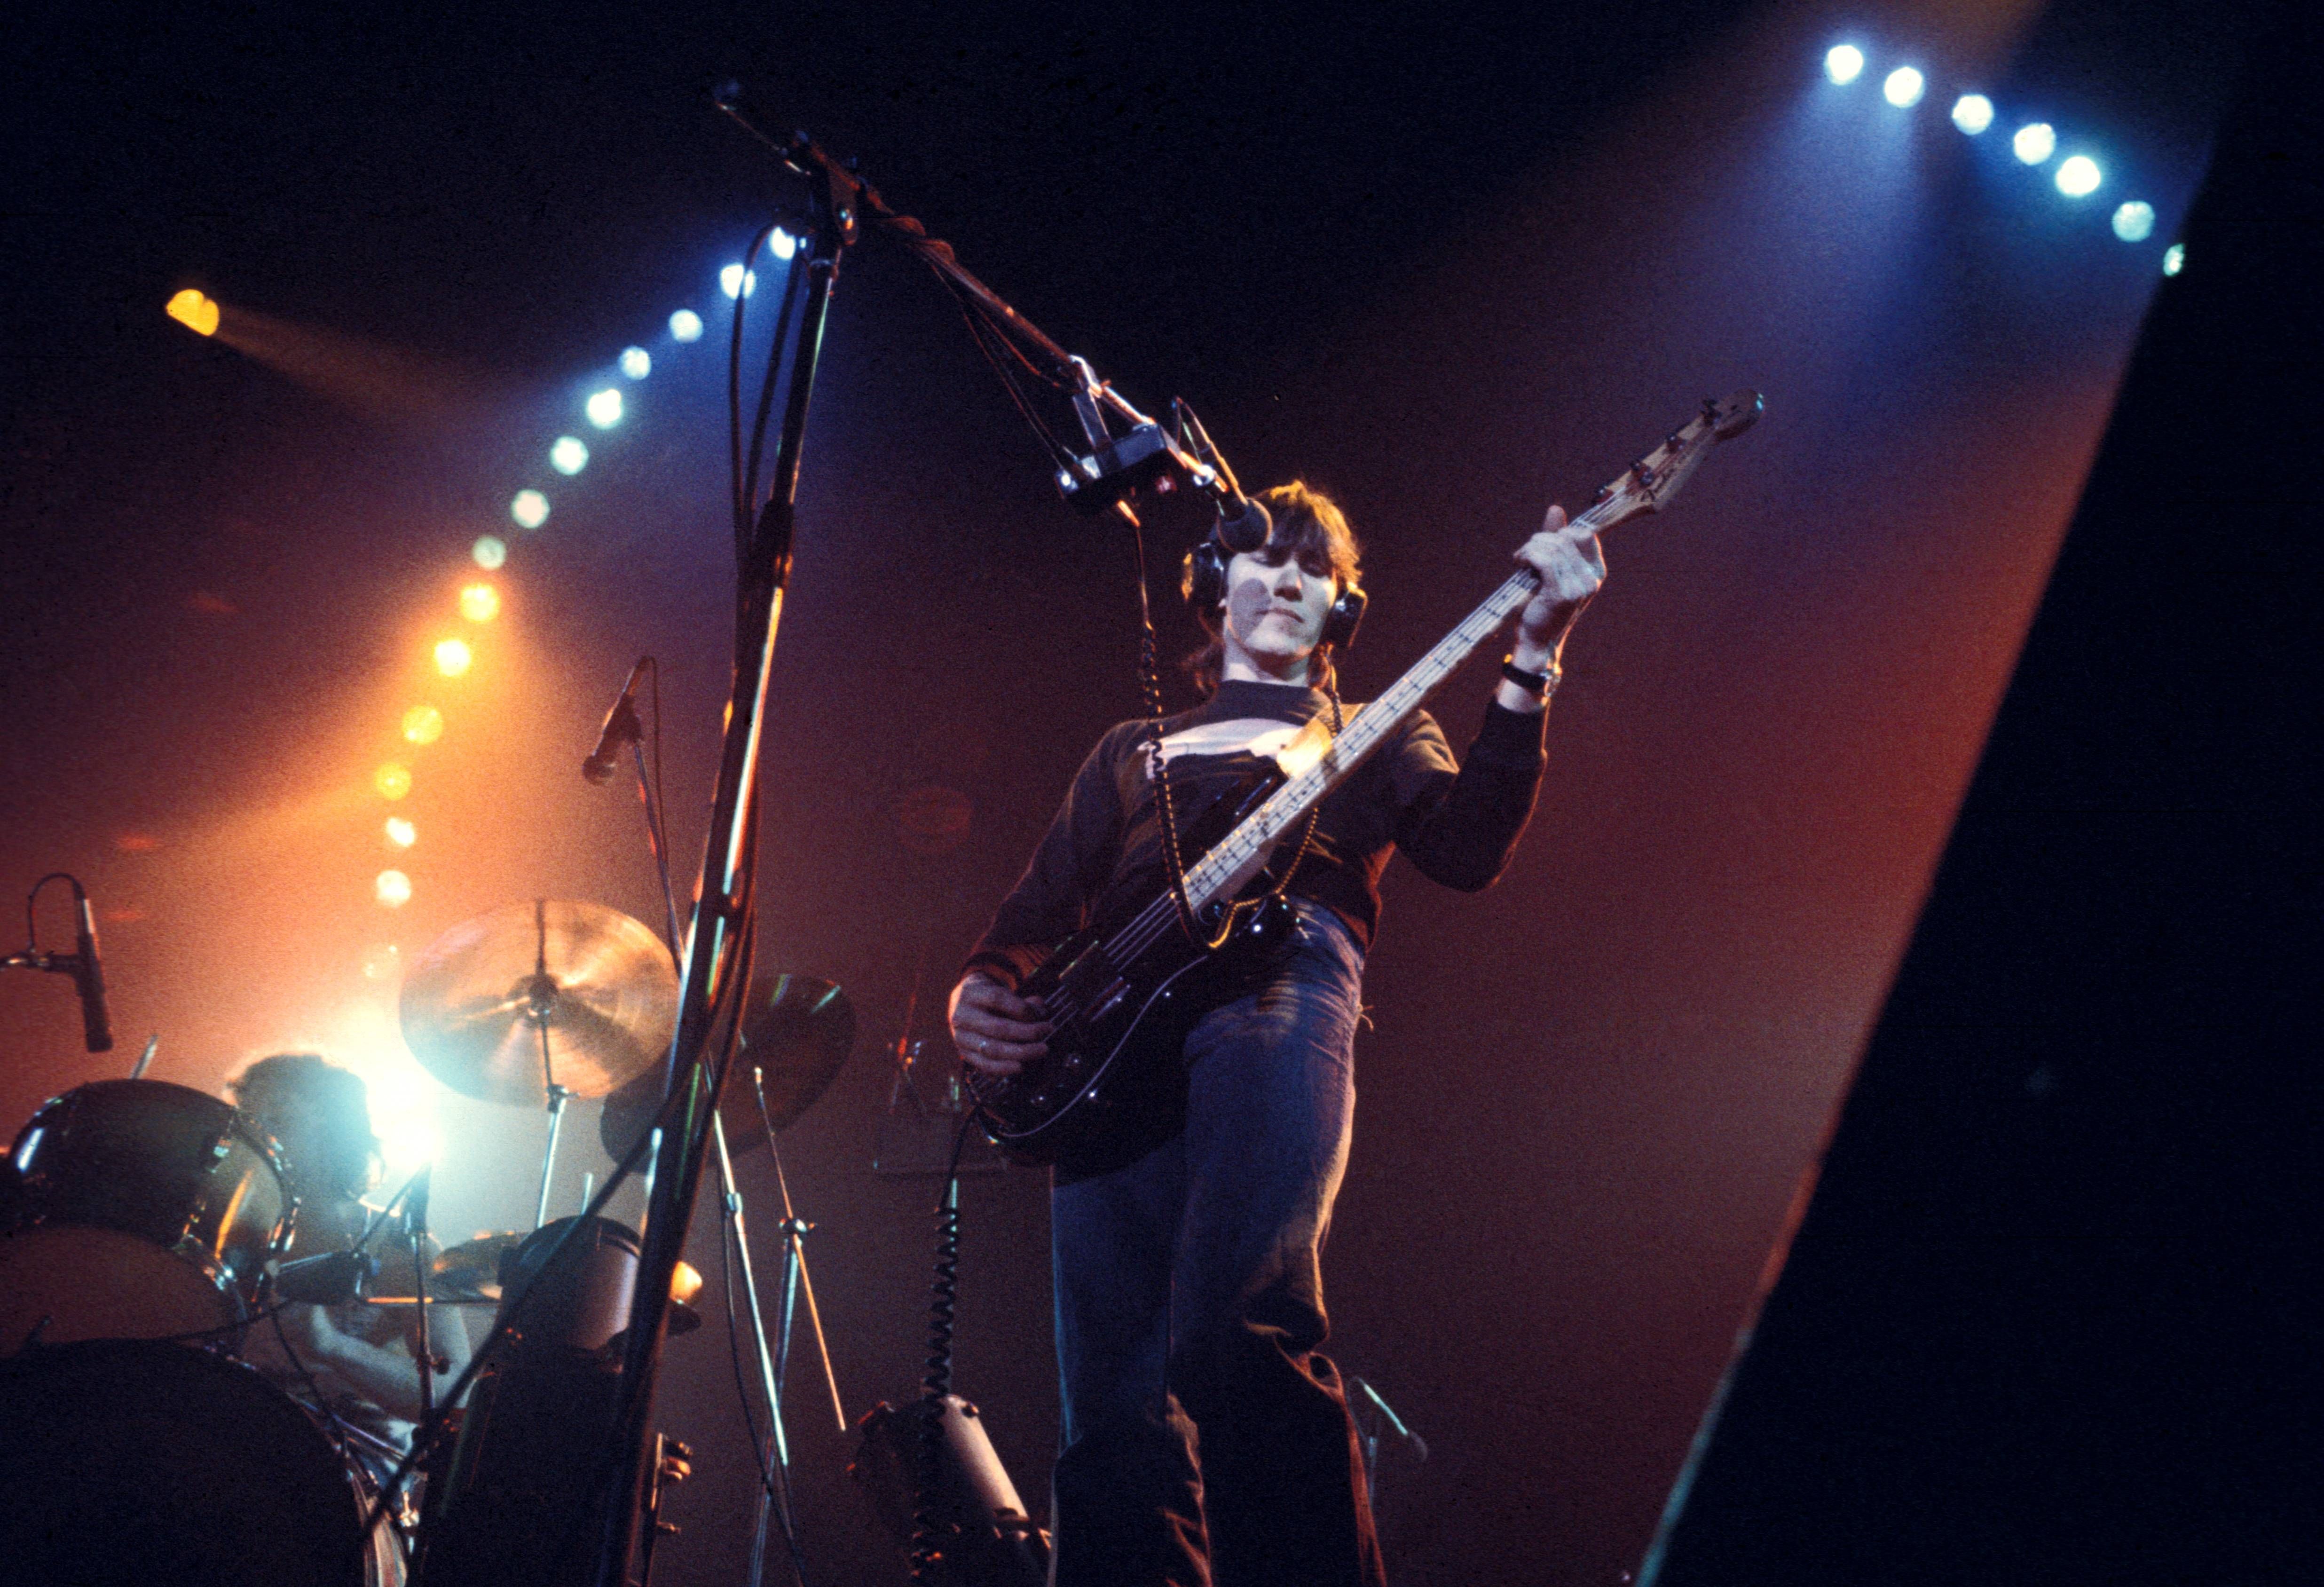 Pink Floyd's Roger Waters plays bass on stage in the 1970s. 